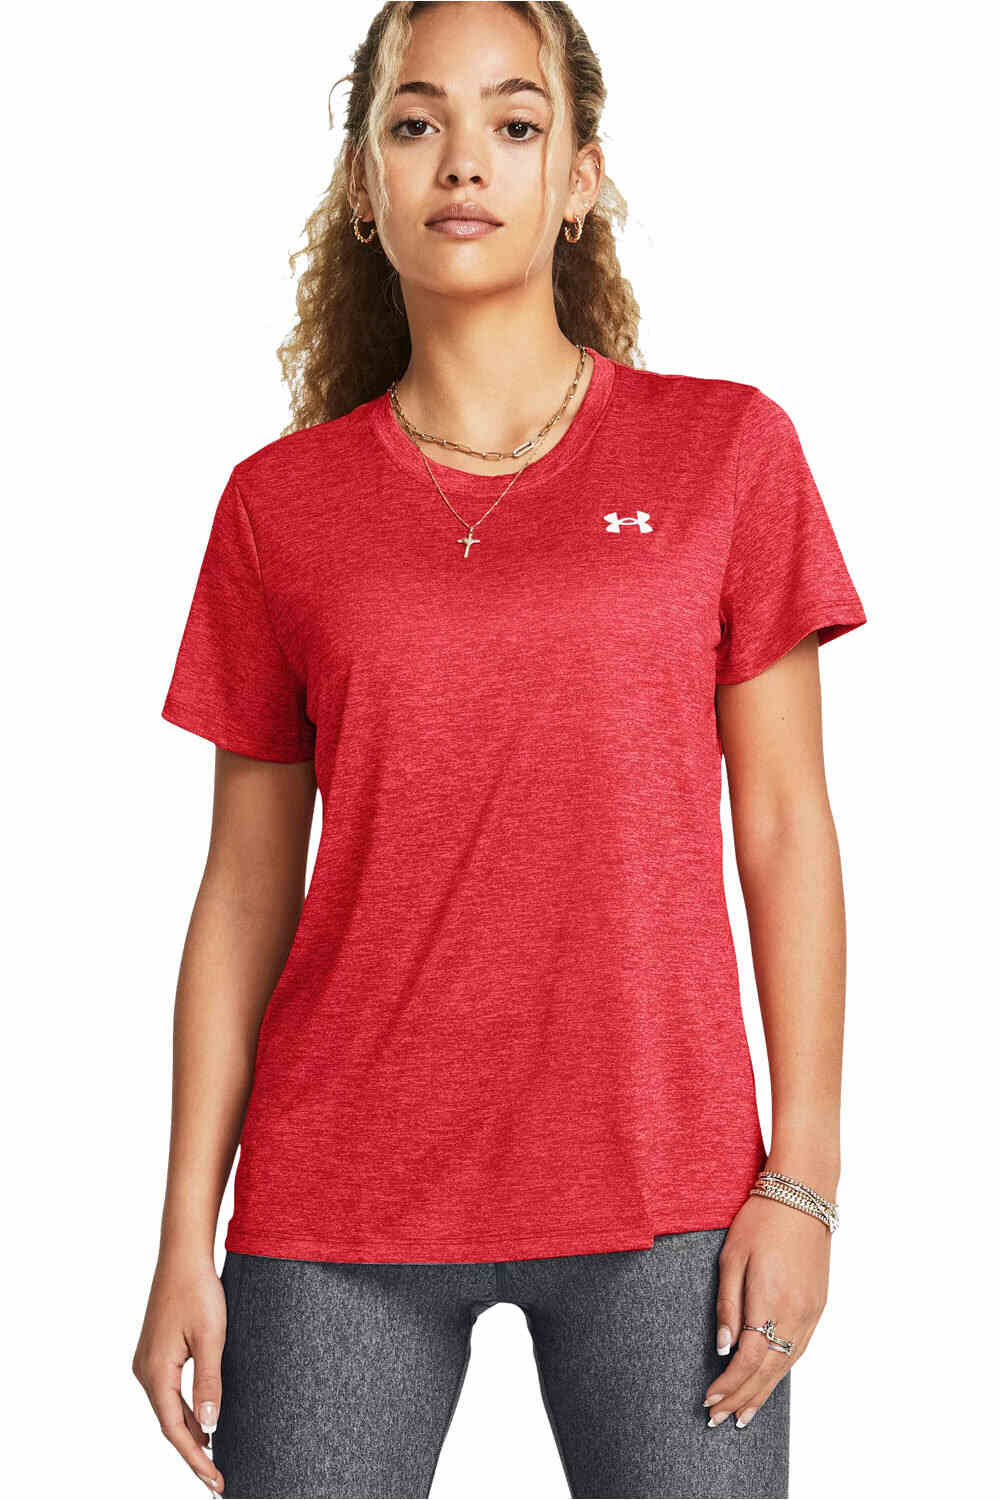 Under Armour camisetas fitness mujer Tech SSC- Twist vista frontal